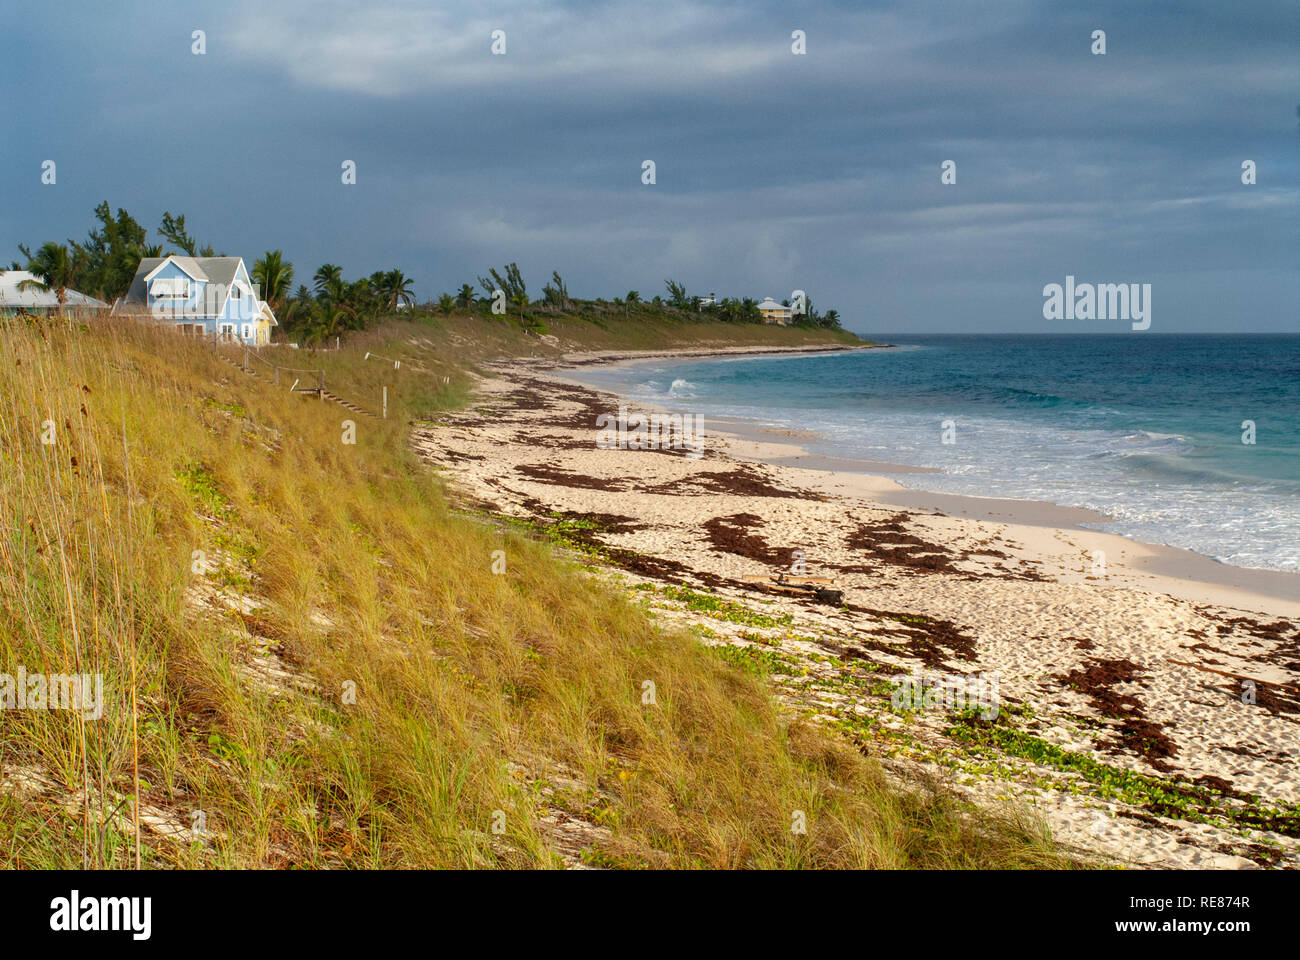 Typical loyalist house next to the beach, Hope Town, Elbow Cay, Abacos. Bahamas Stock Photo